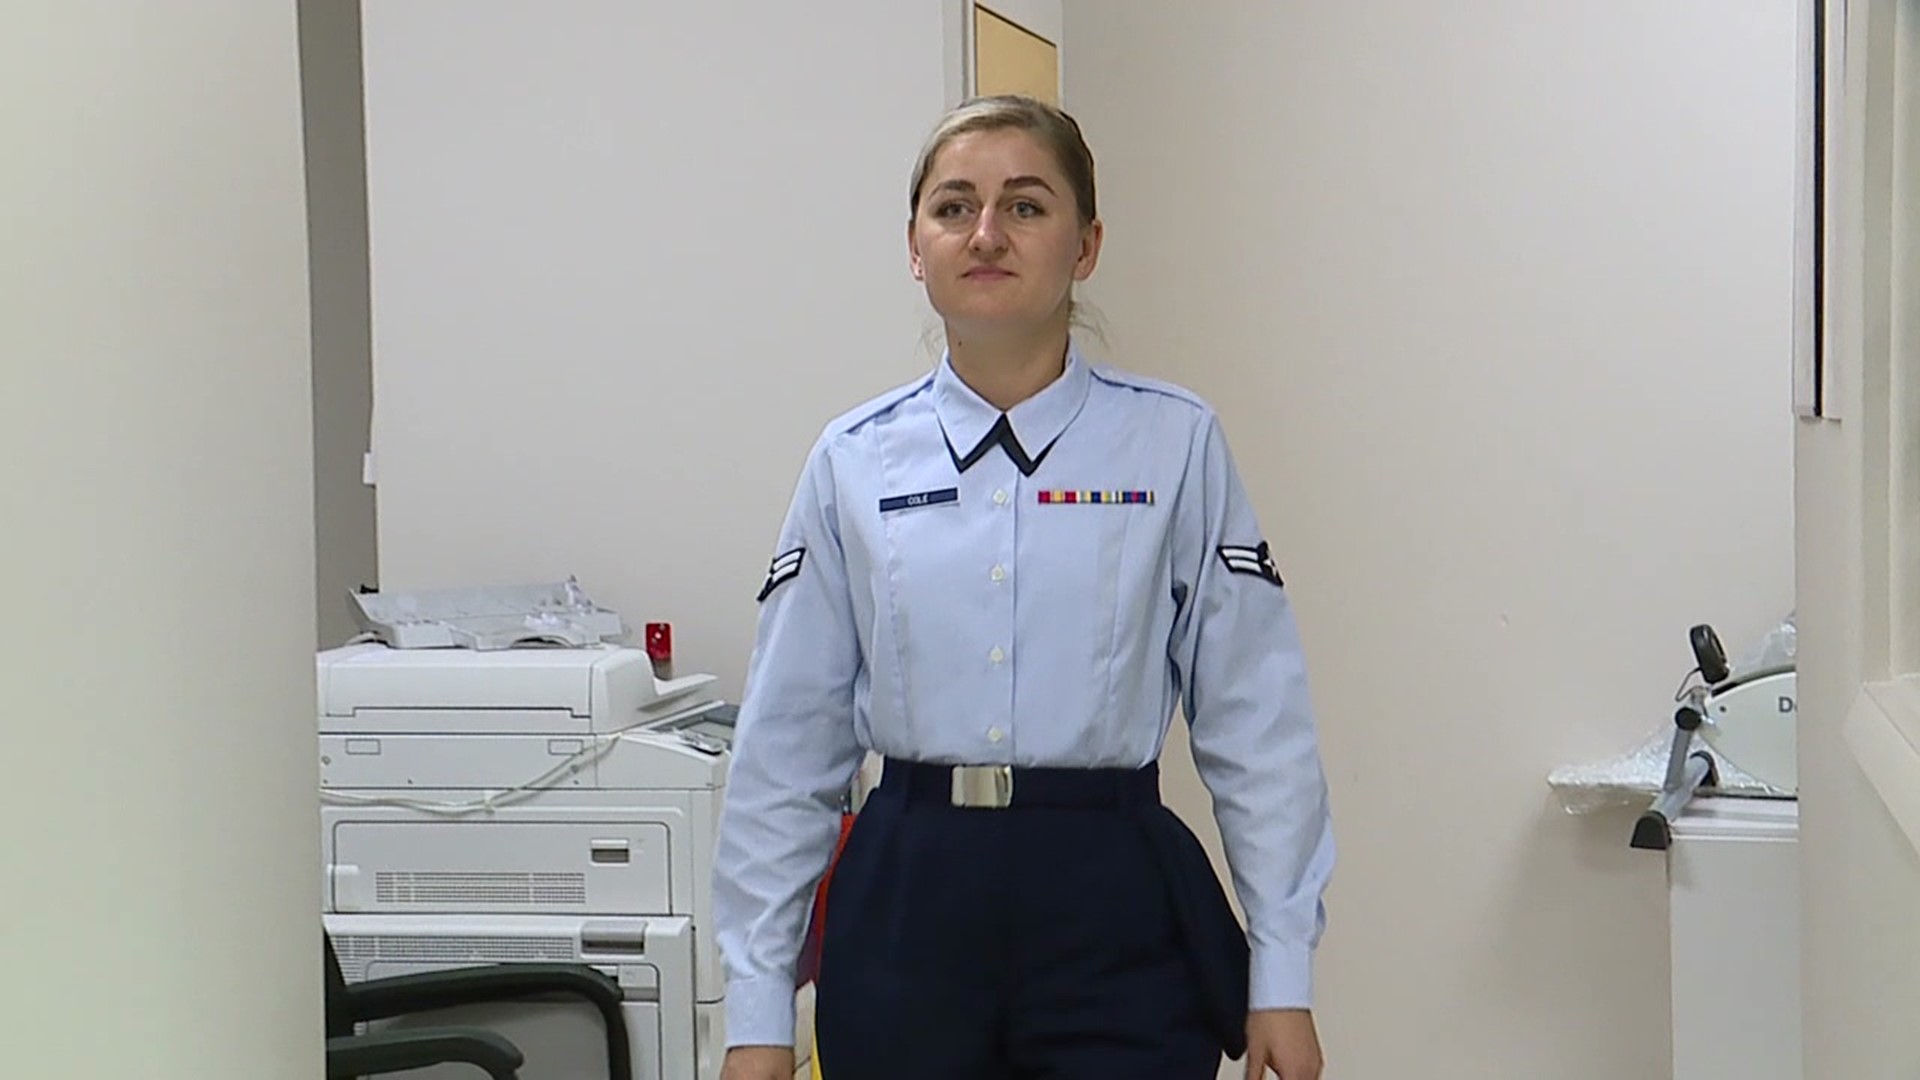 Galyna Cole immigrated to the United States of America just two years ago, and now she is serving her new country.